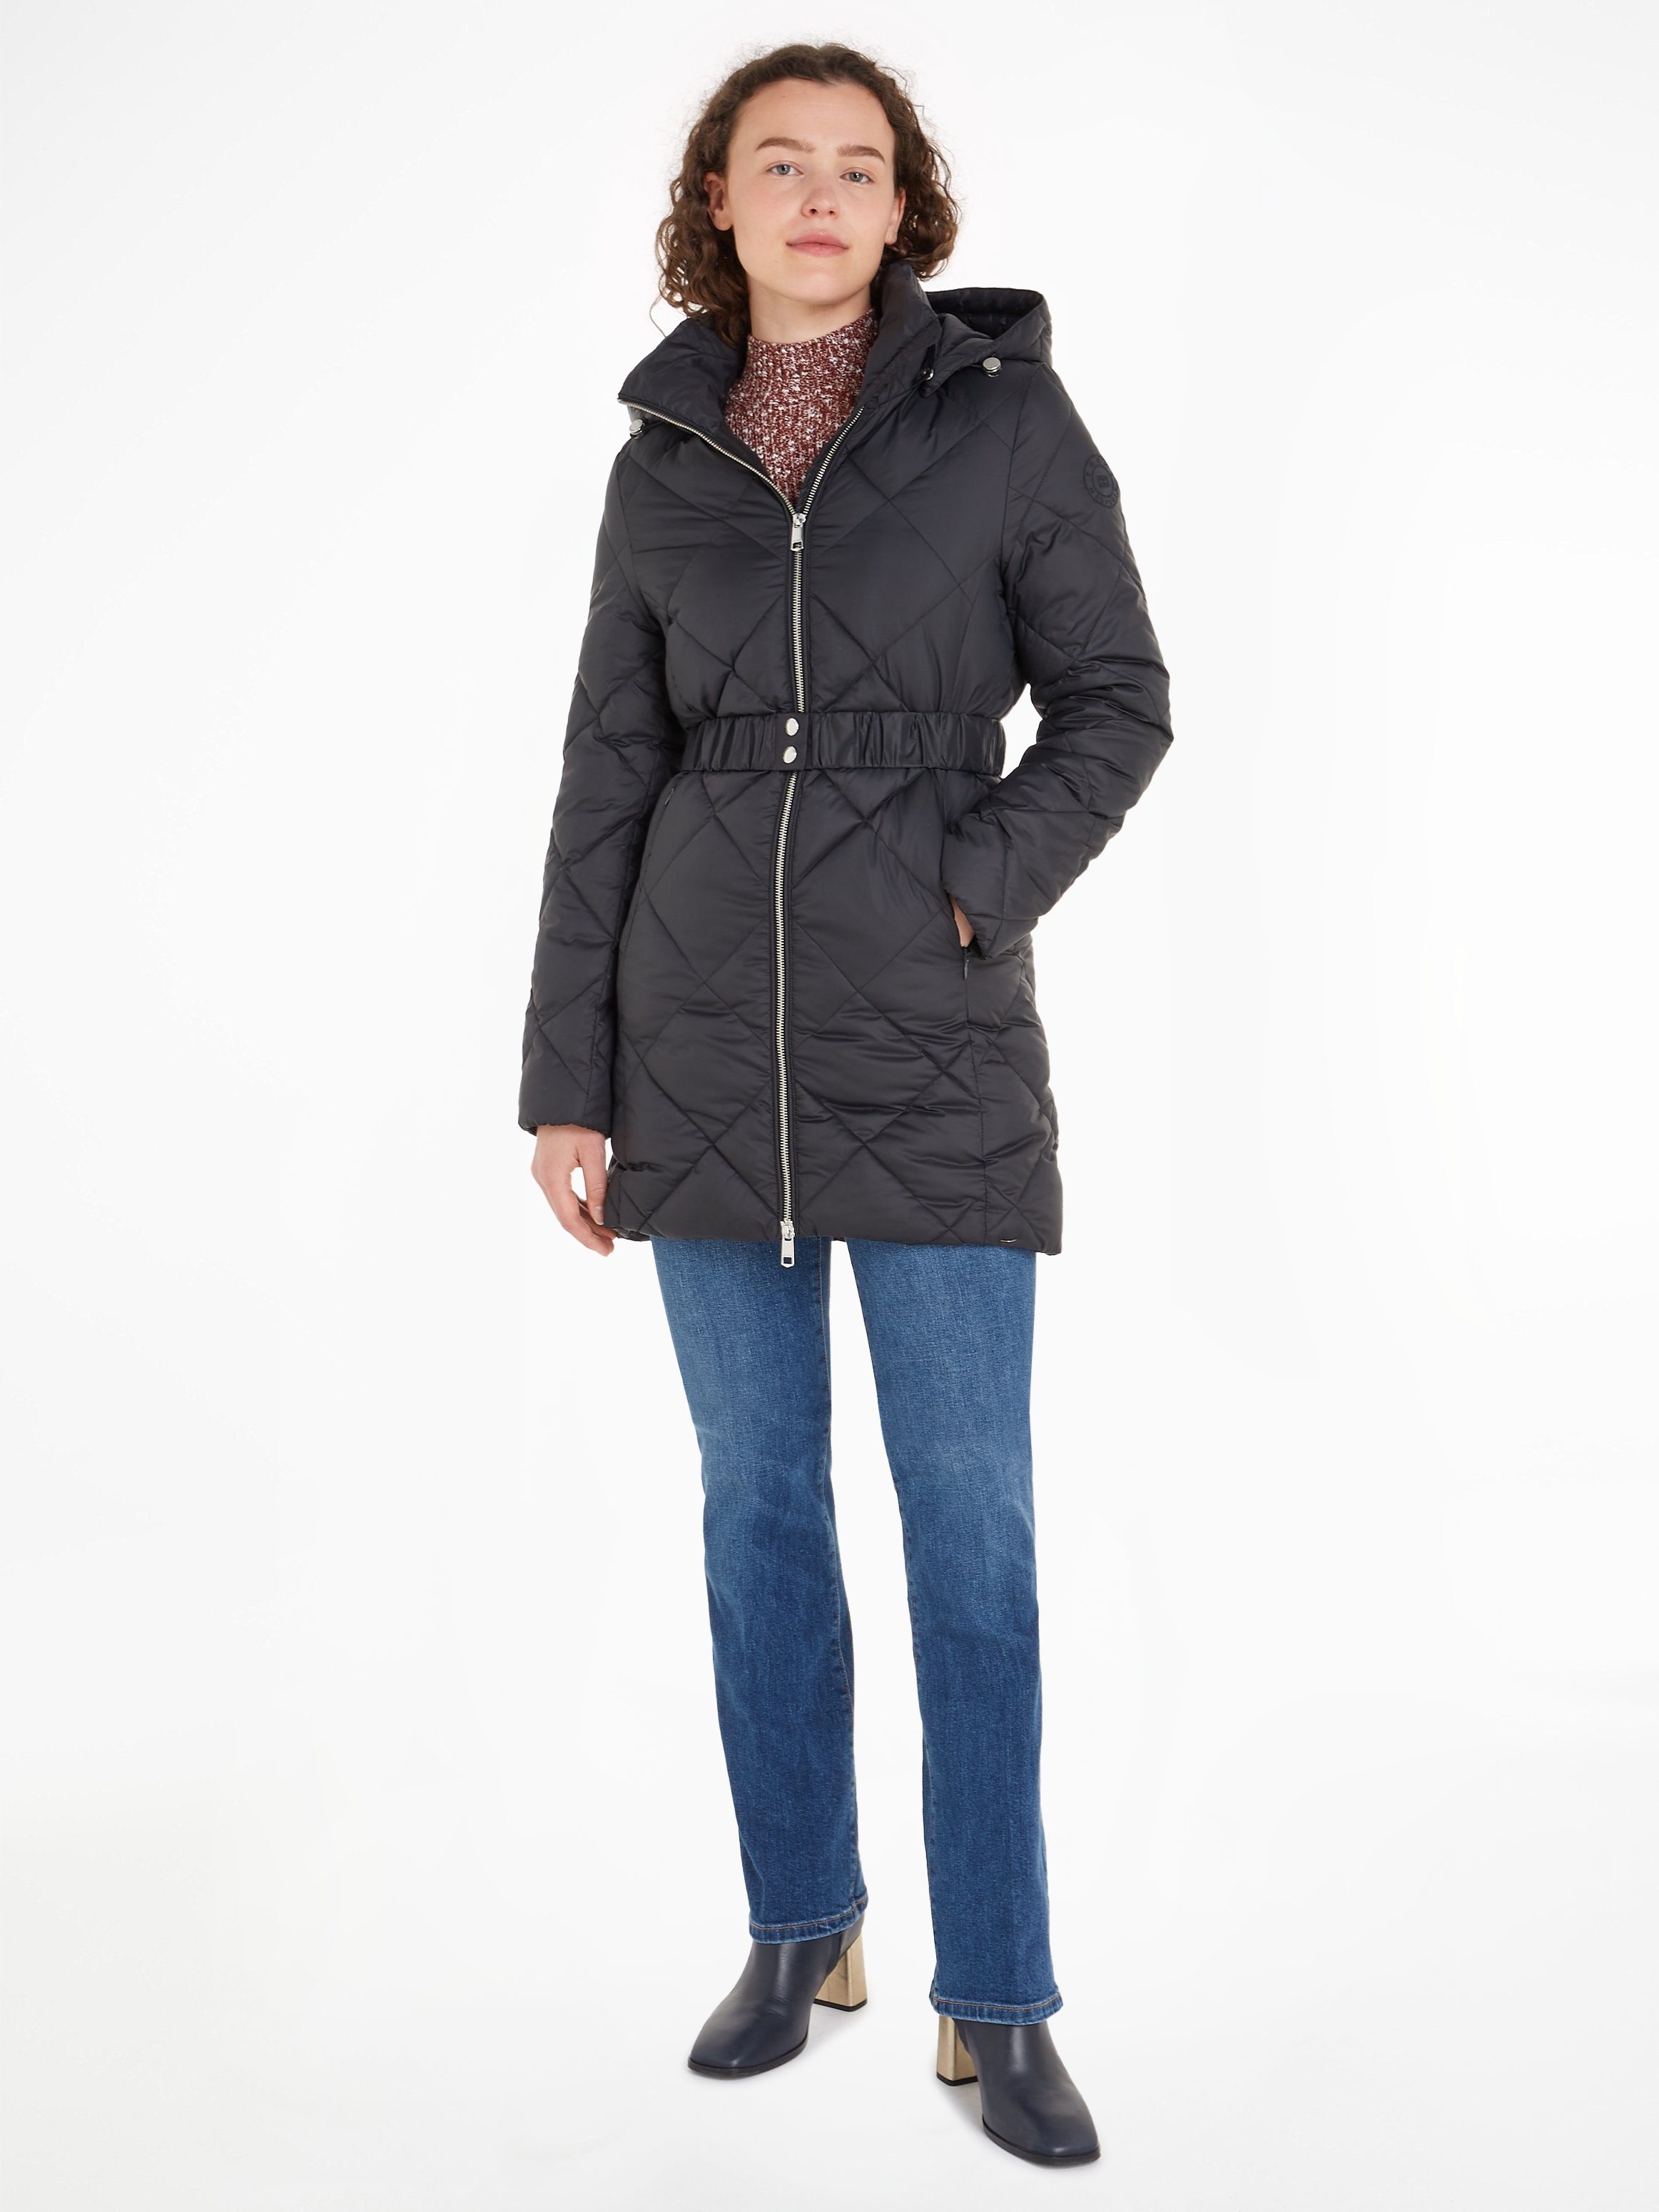 Tommy Hilfiger Steppmantel ELEVATED BELTED QUILTED mit abnehmbarer Kapuze COAT